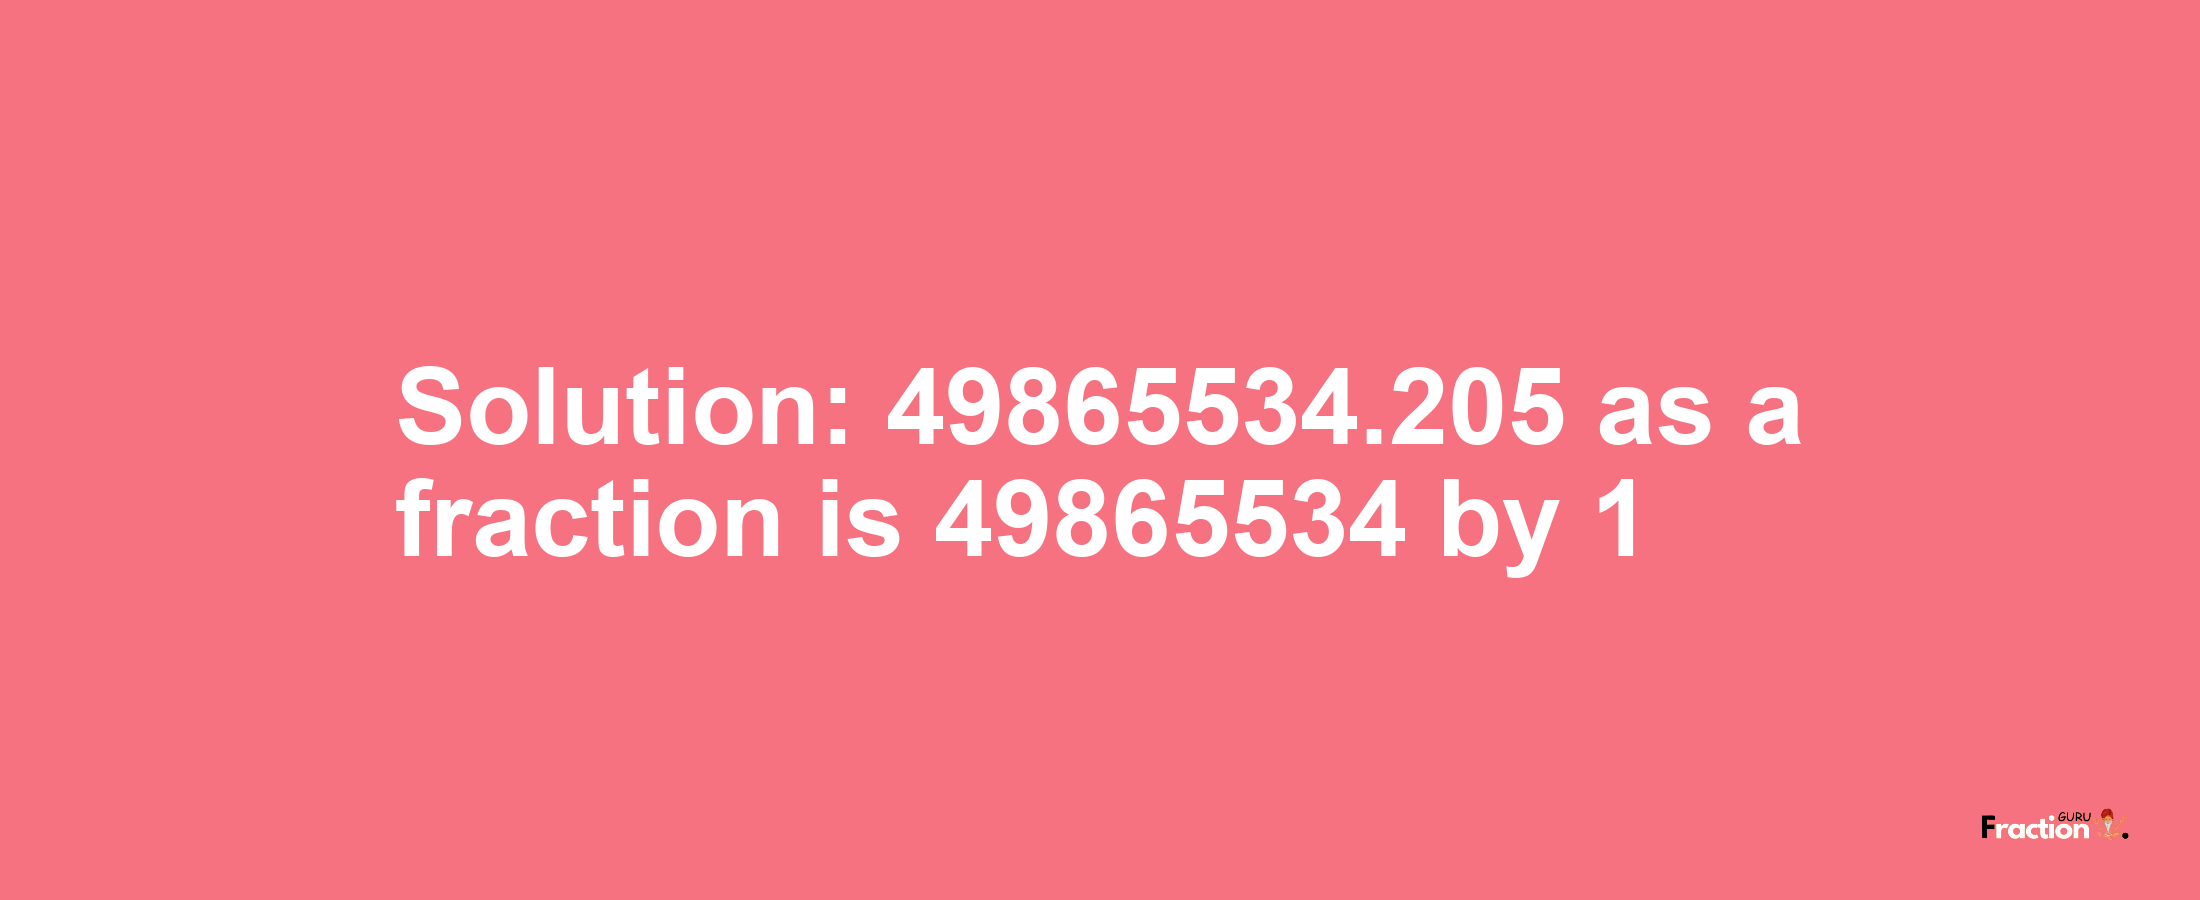 Solution:49865534.205 as a fraction is 49865534/1